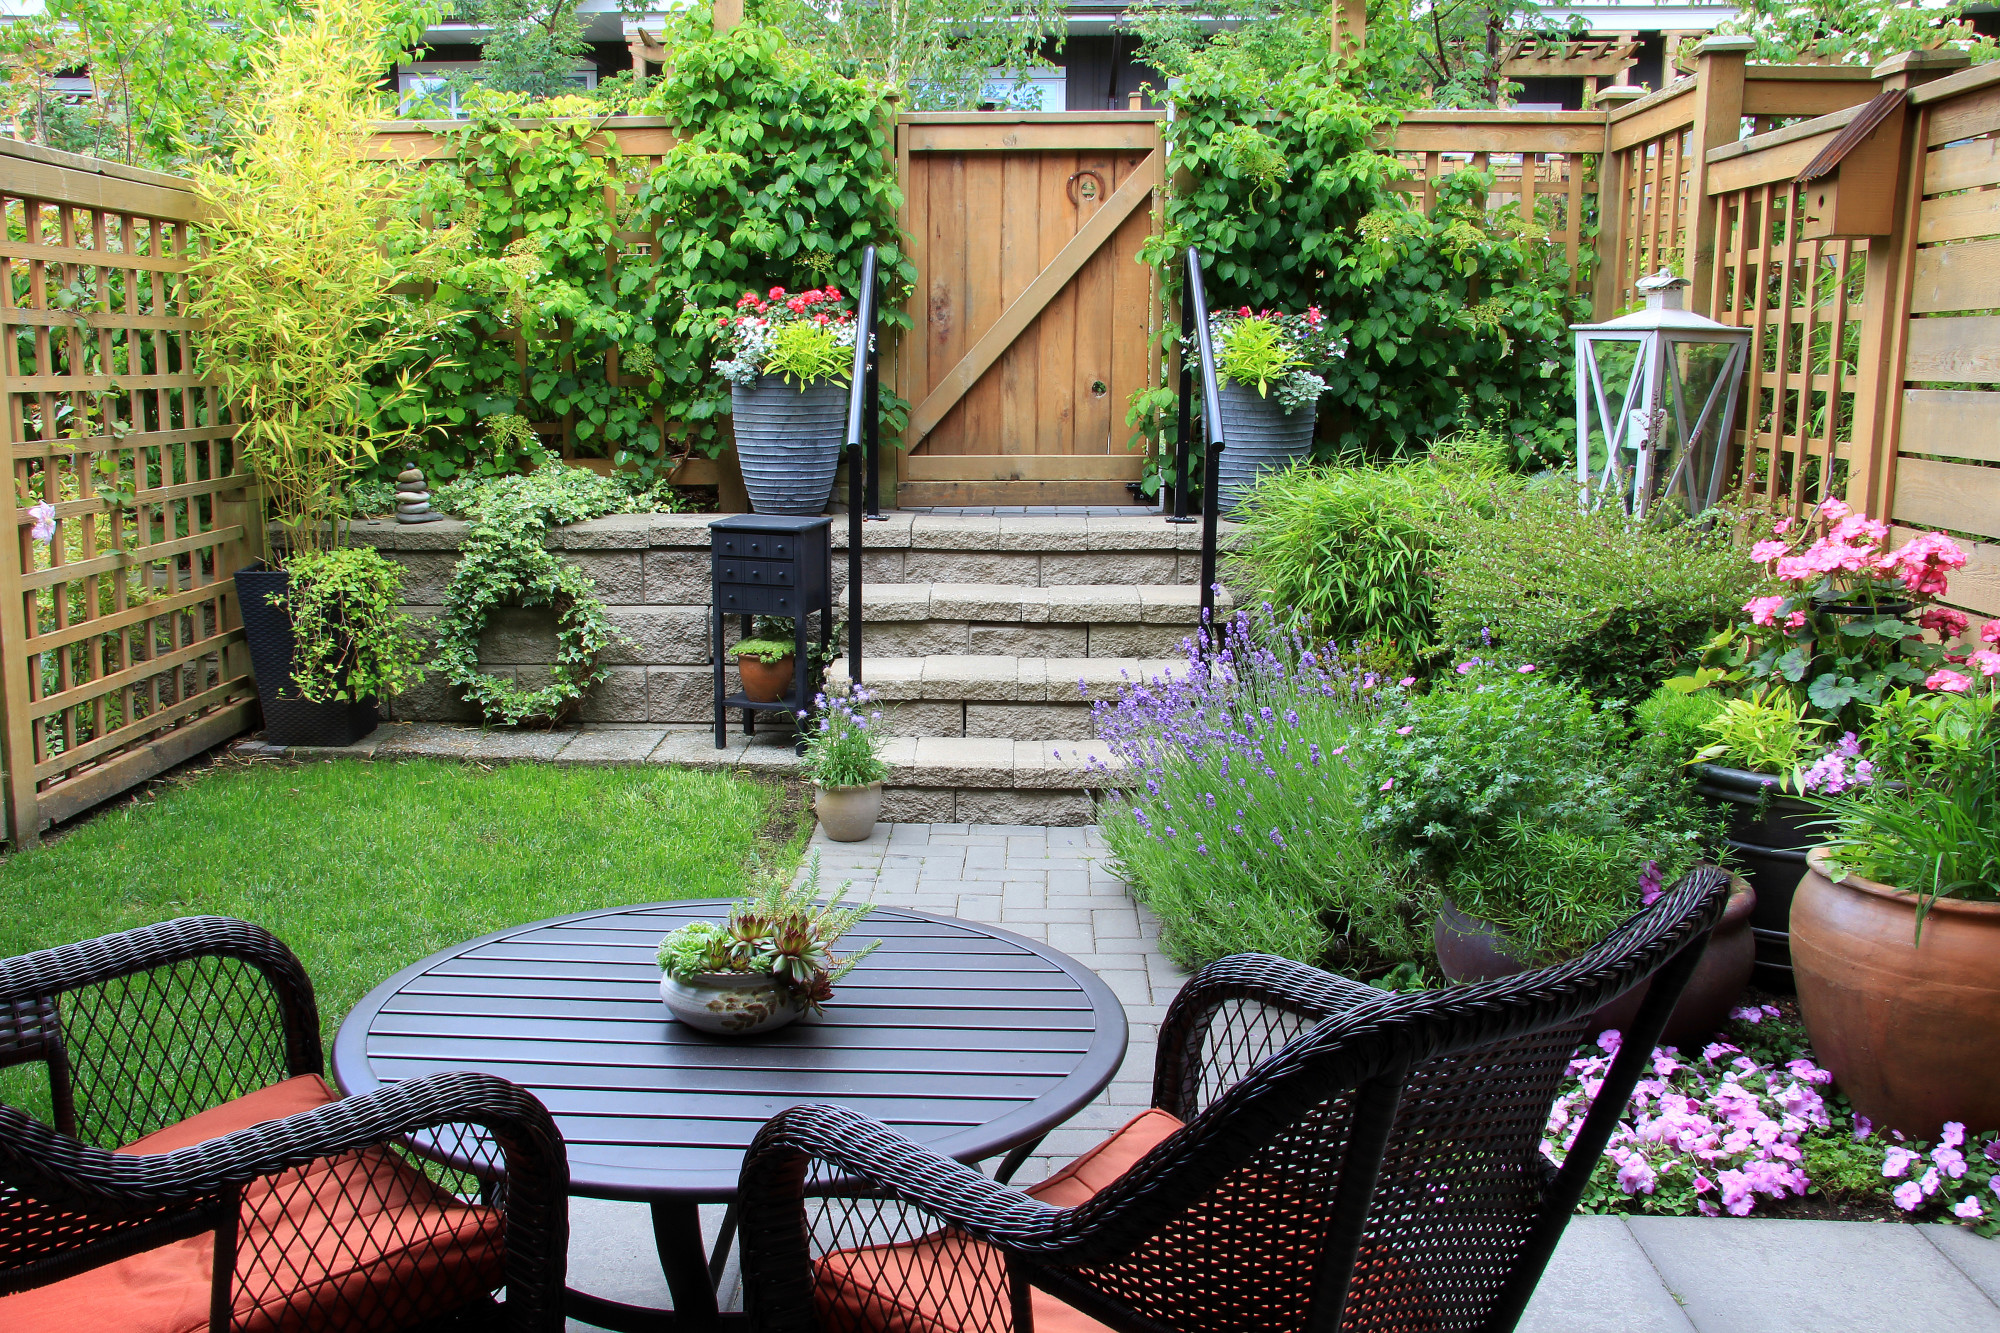 When you want to spruce up your backyard for the summer, click here to explore these inspiring garden design ideas you'll love!